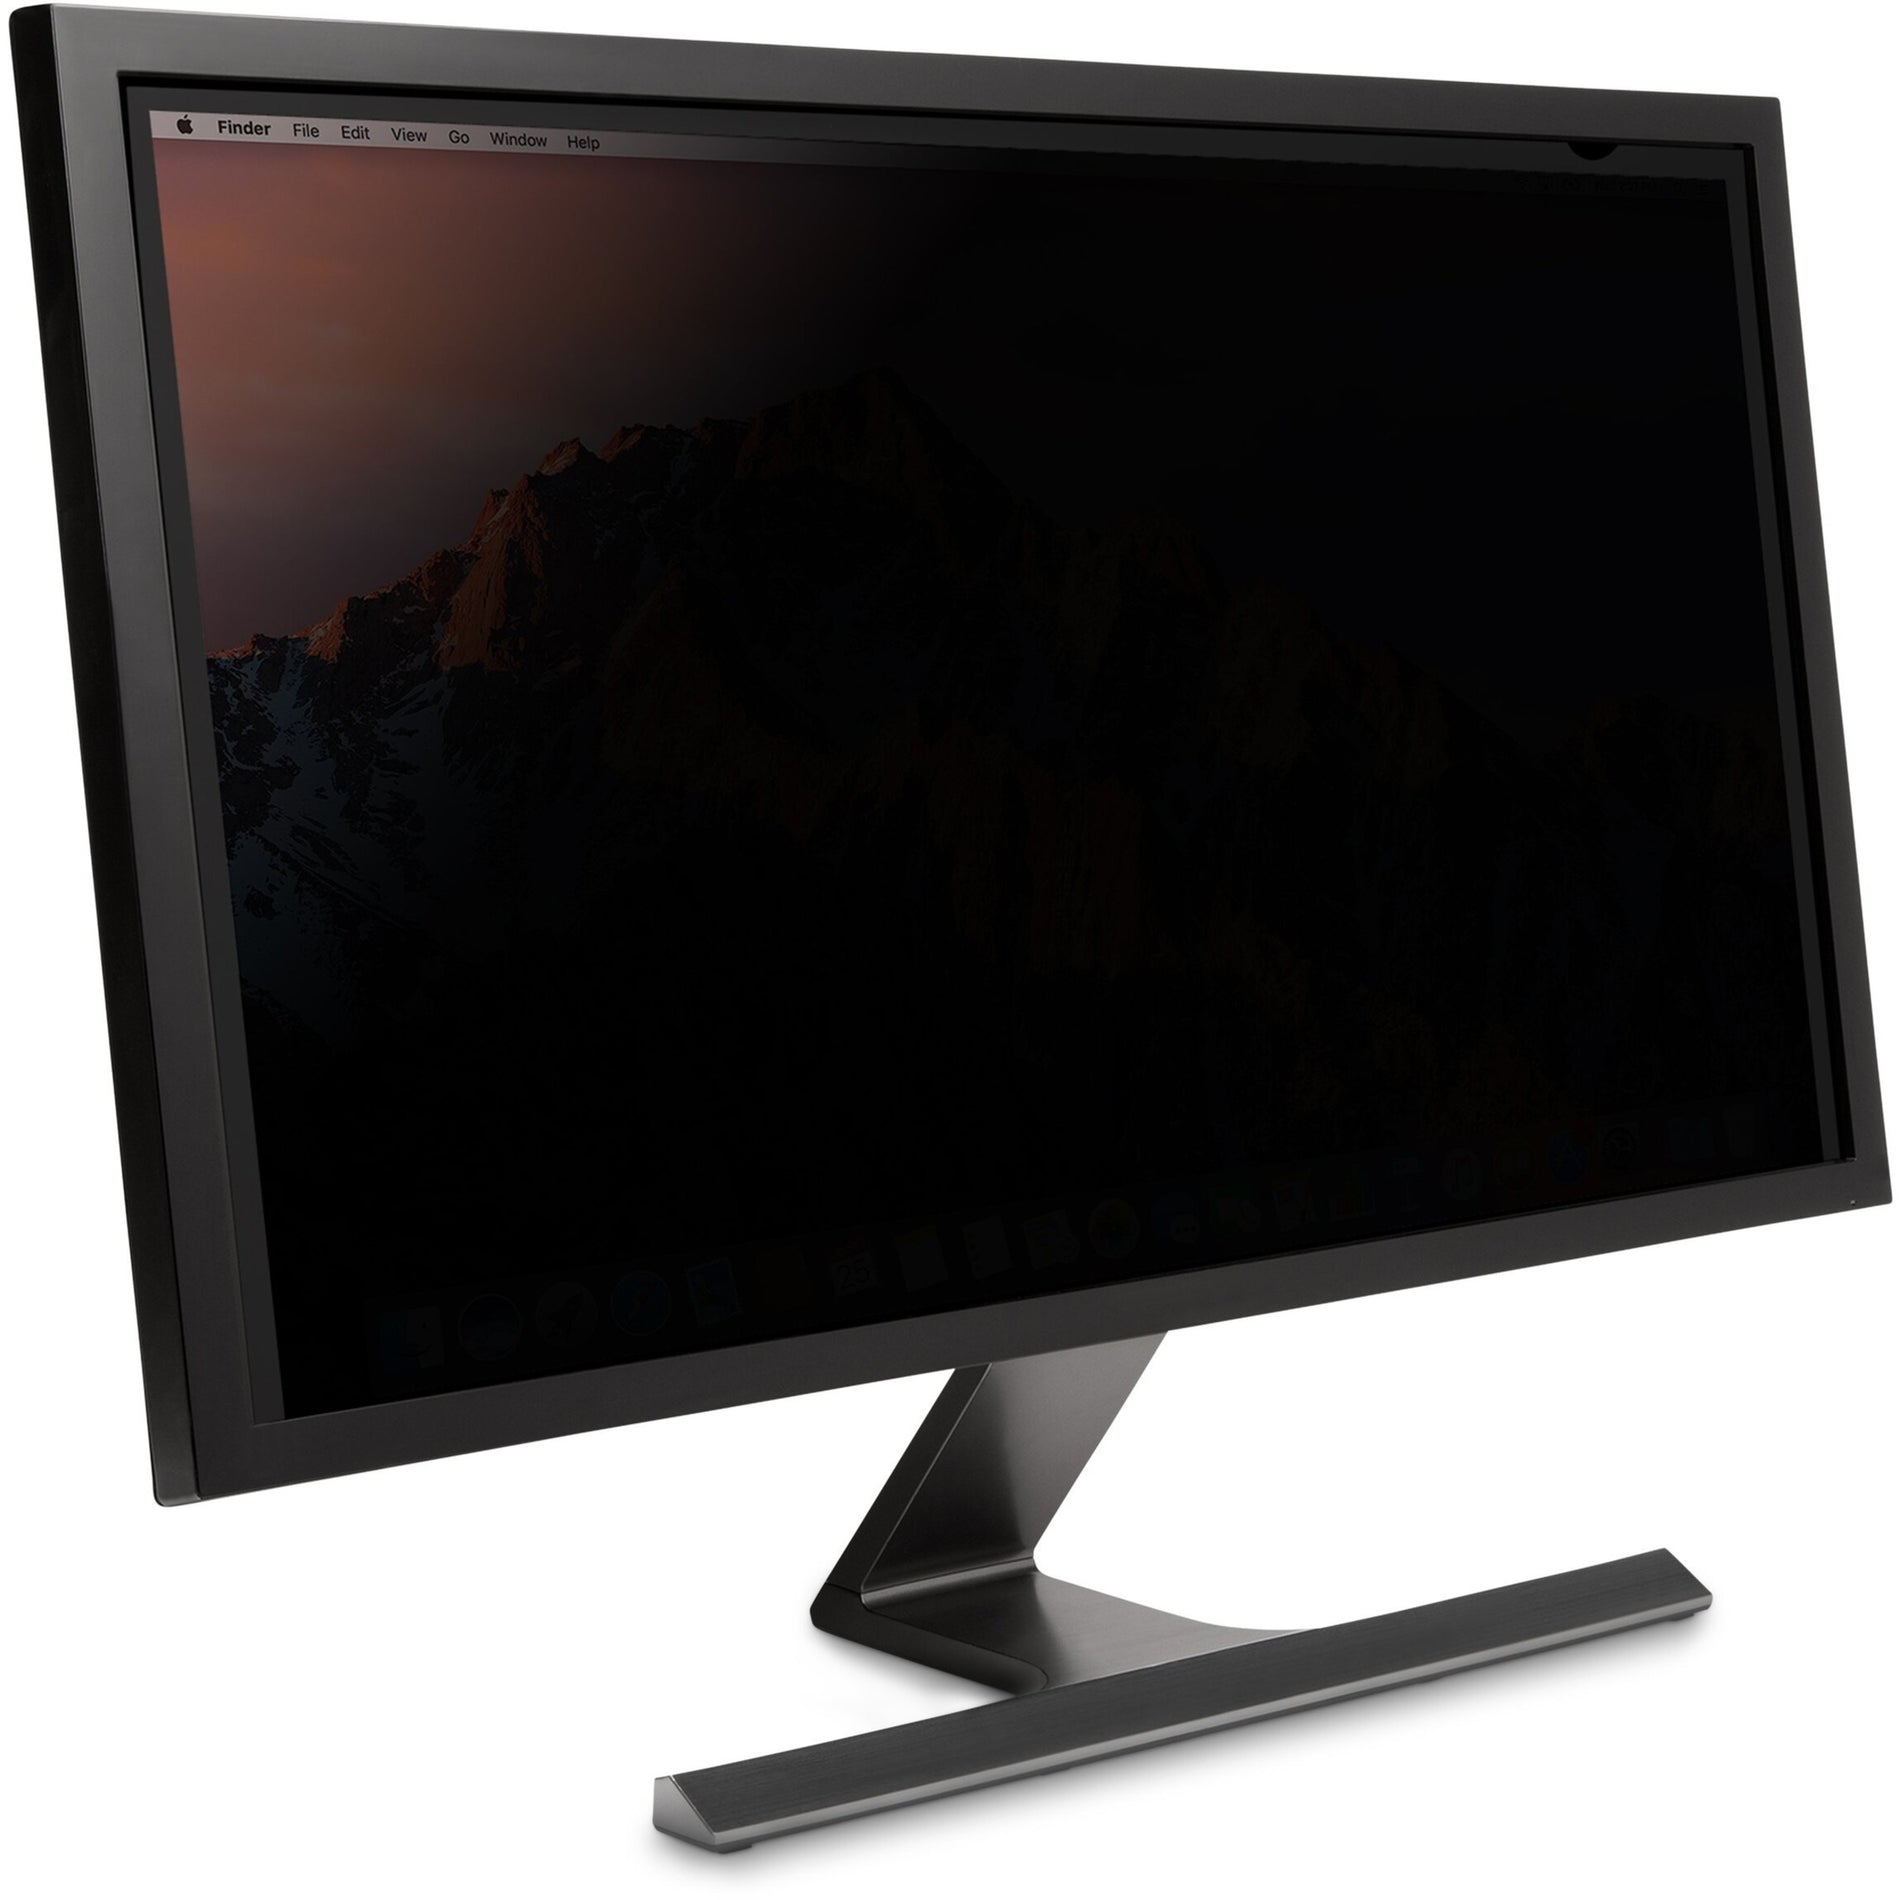 Kensington K60730WW FP236W9 Privacy Screen for Widescreen Monitors (23.6" 16:9), Anti-Reflective, Reversible Matte-to-Glossy, Blue Light Reduction